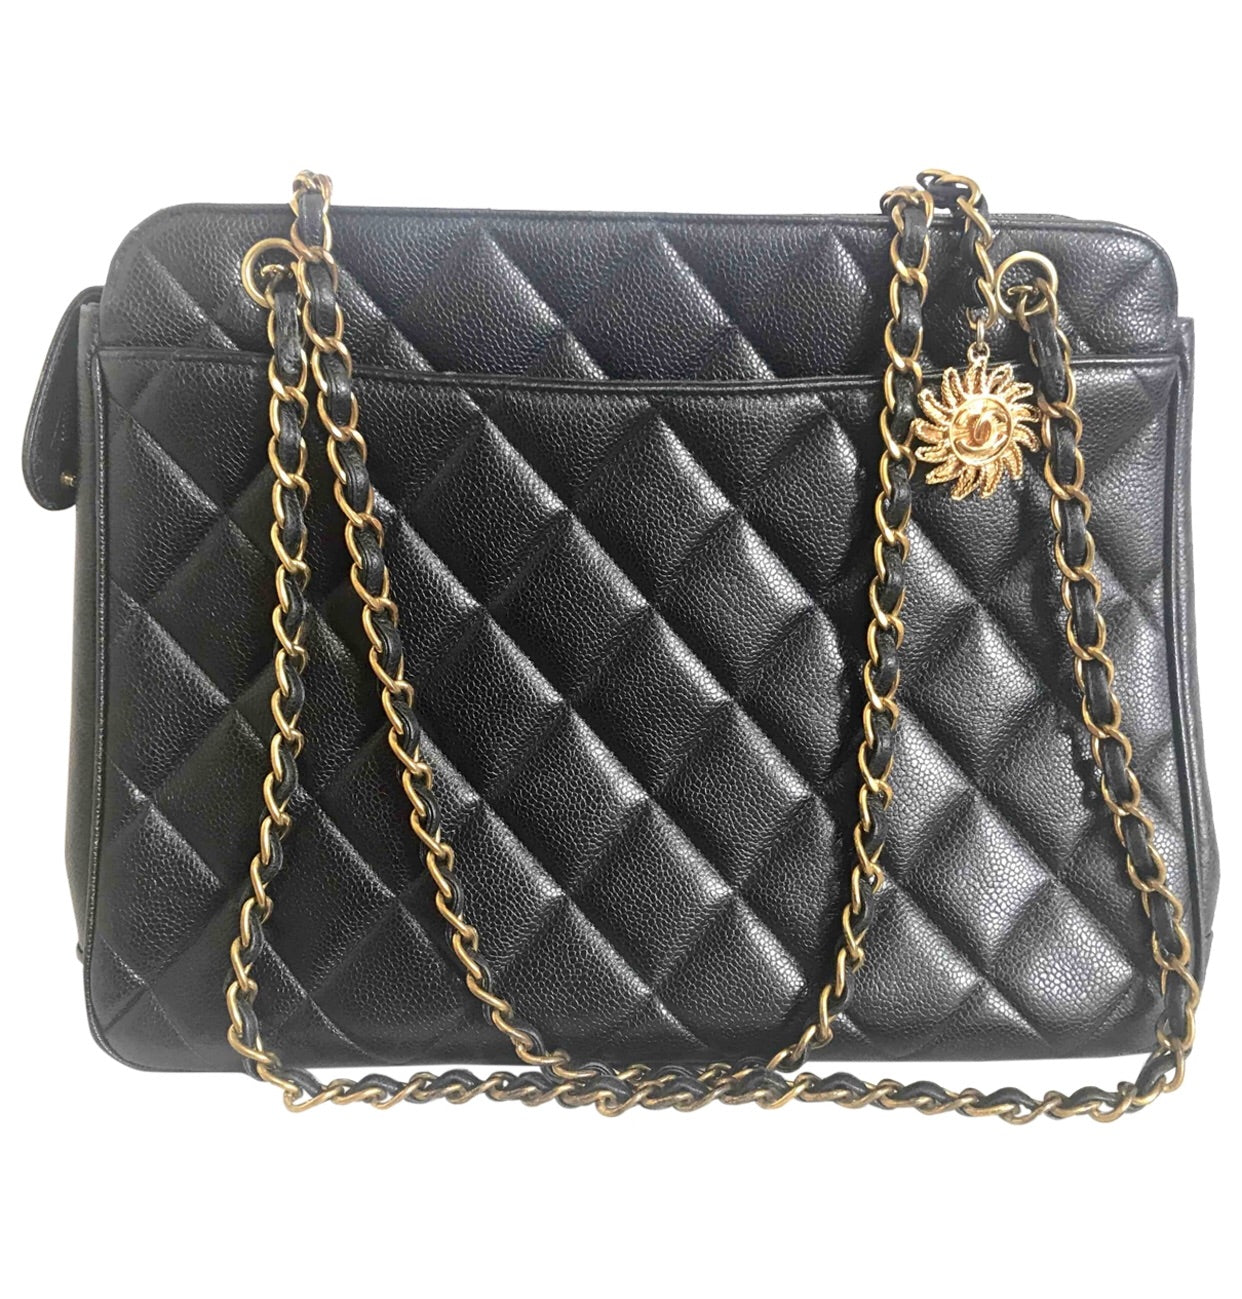 Bougie on a Budget: Vintage Chanel Flap Bag - From Nubiana, With Love